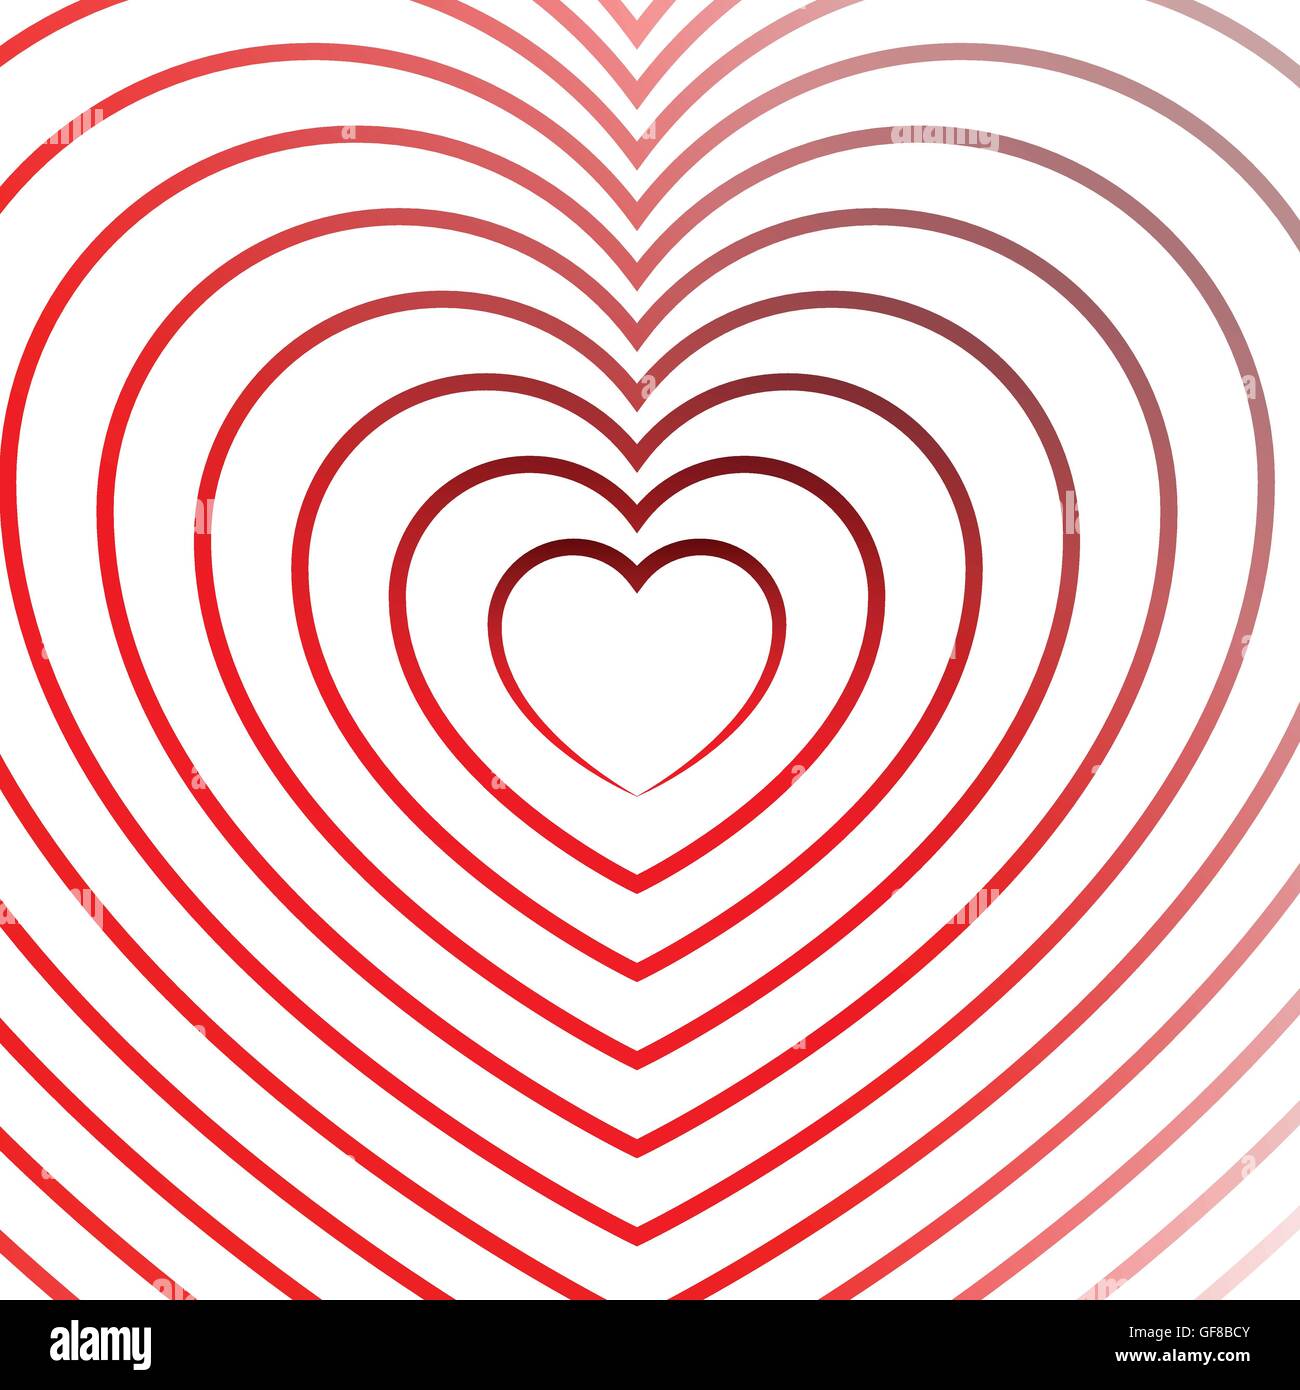 Bright heart element with outlines in radial fashion Stock Vector